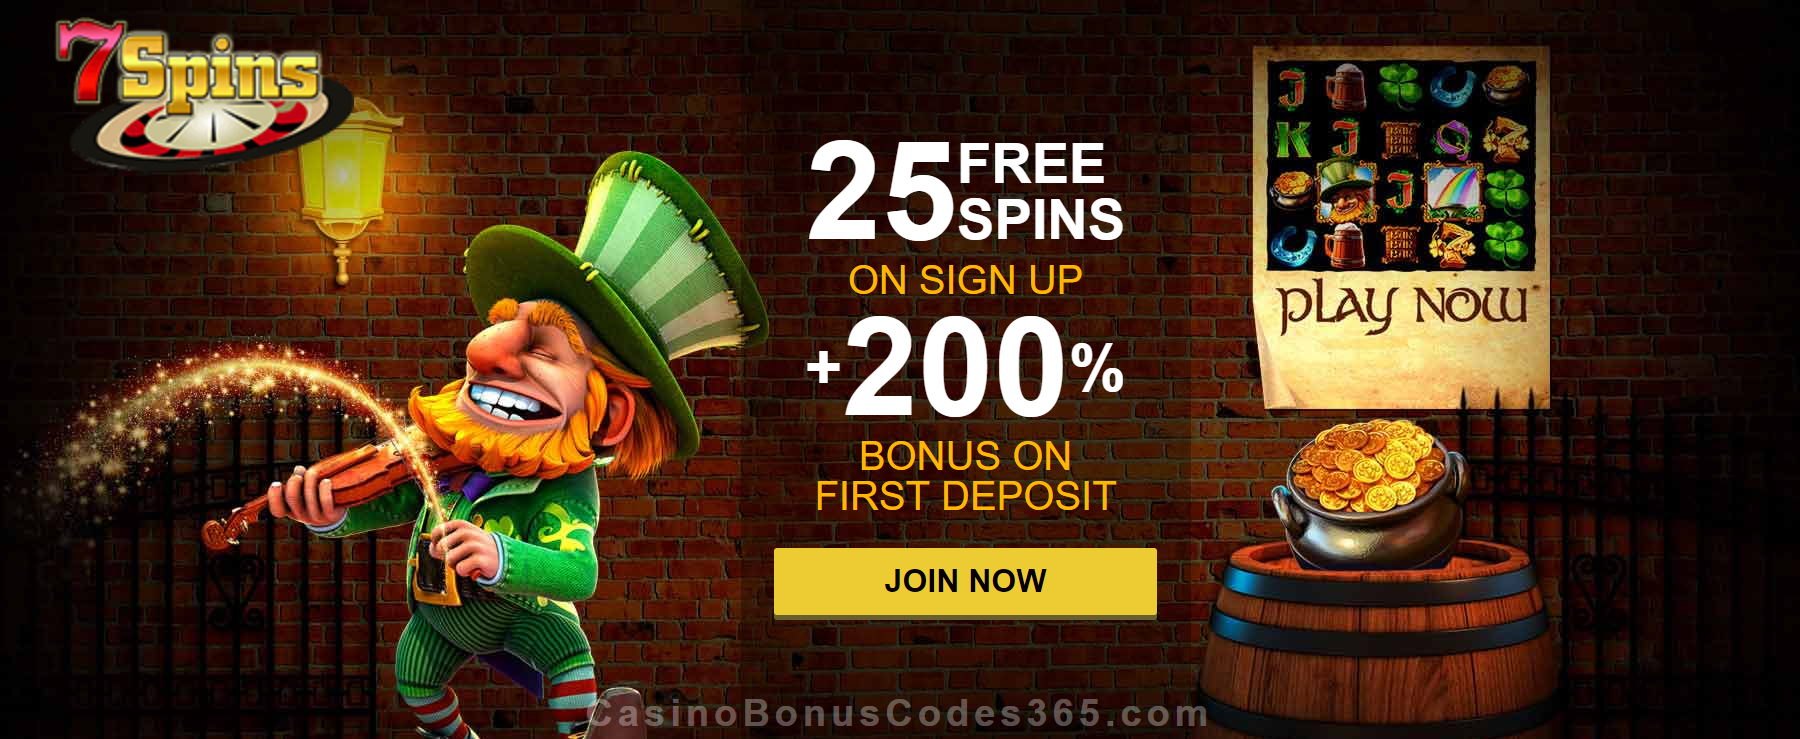 planet 7 casino 14 free spins